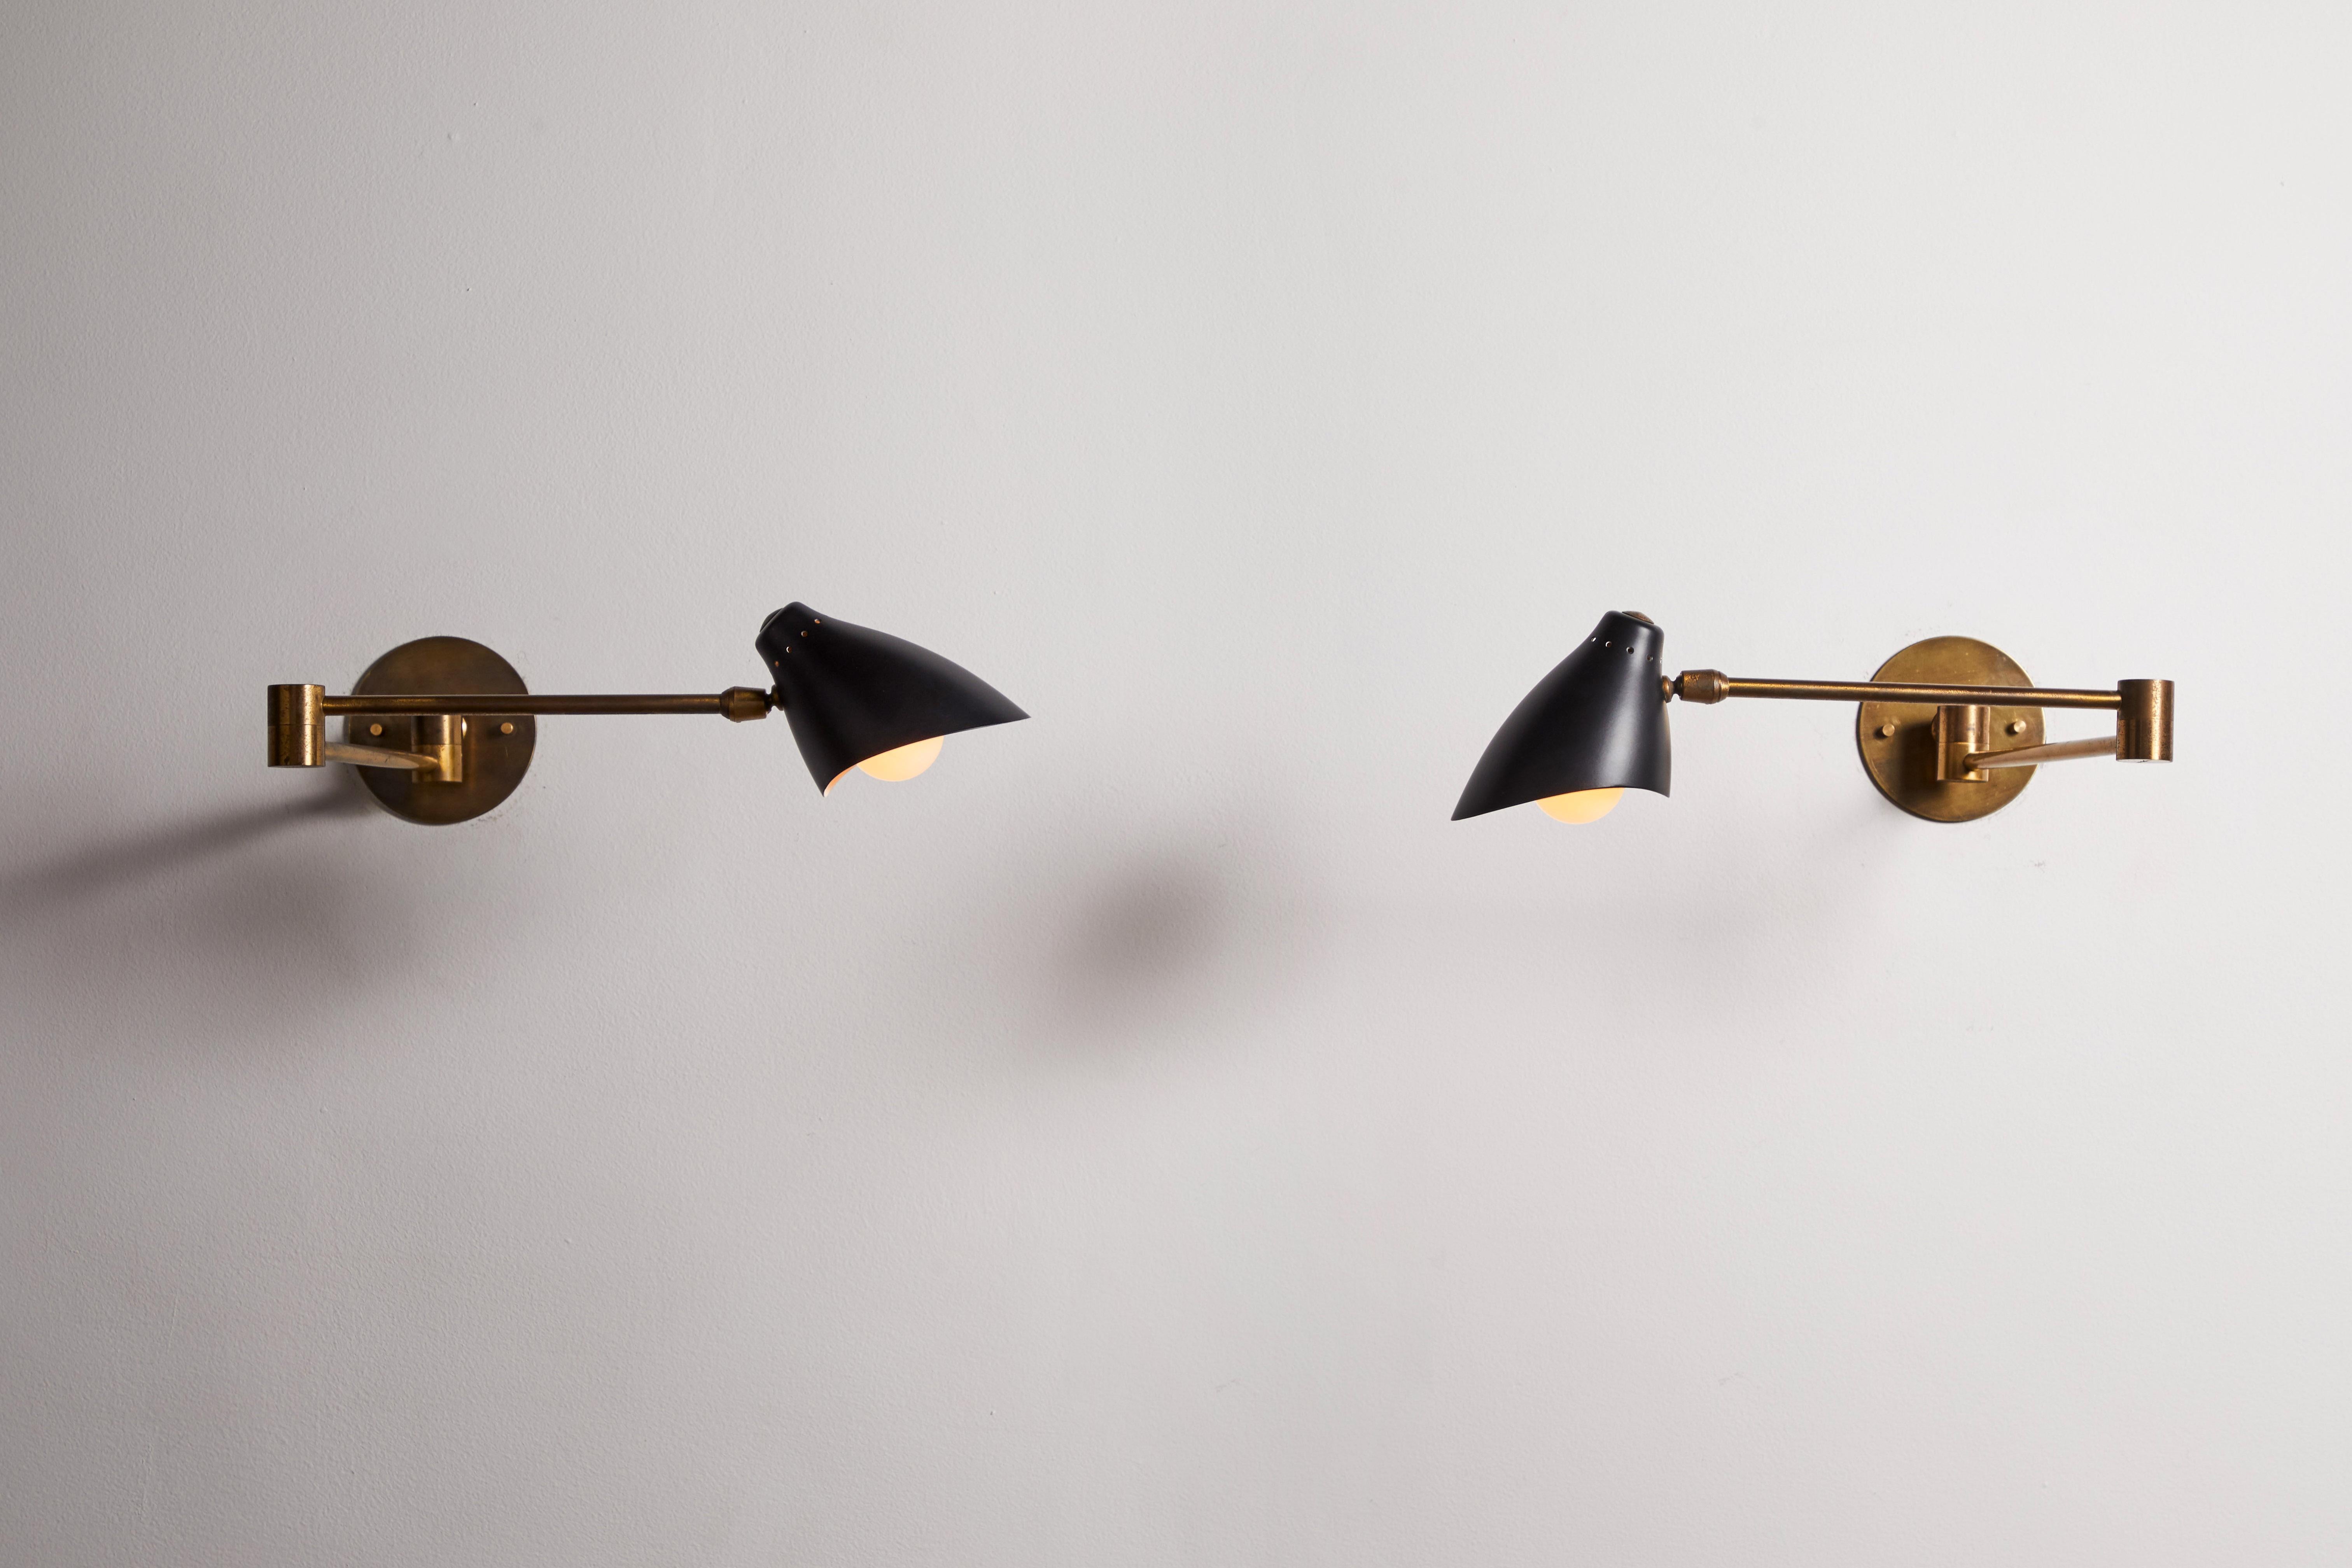 Pair of sconces by Angelo Lelli for Arredoluce. Designed and manufactured in Italy, 1953. Enameled metal, brass. Rewired for U.S. junction boxes. Arms adjust via a triple joint structure. Shades adjust to various positions via ball joint. Custom